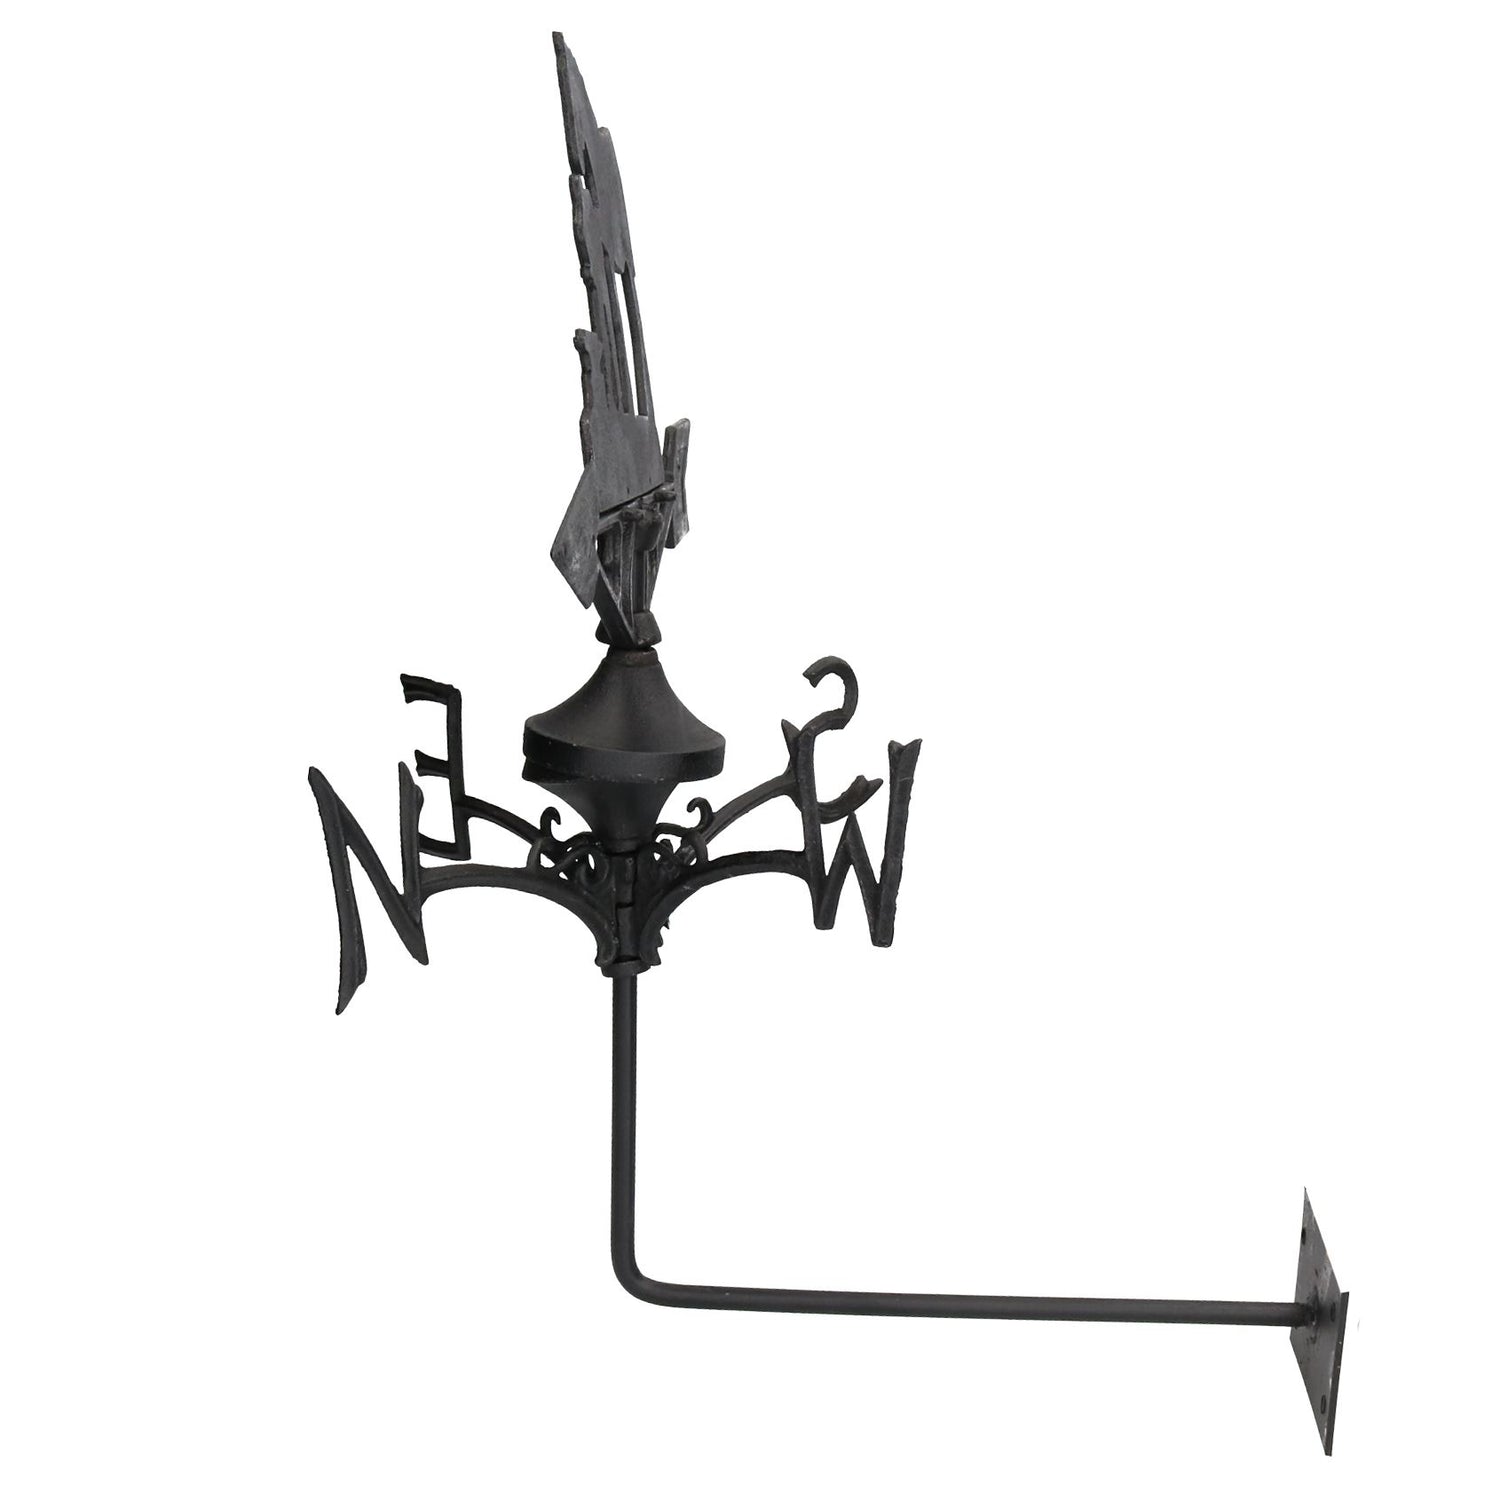 Horse / Mare Farrier Weather Vane Vain Wall Mount House Roof Cast Iron Shoe